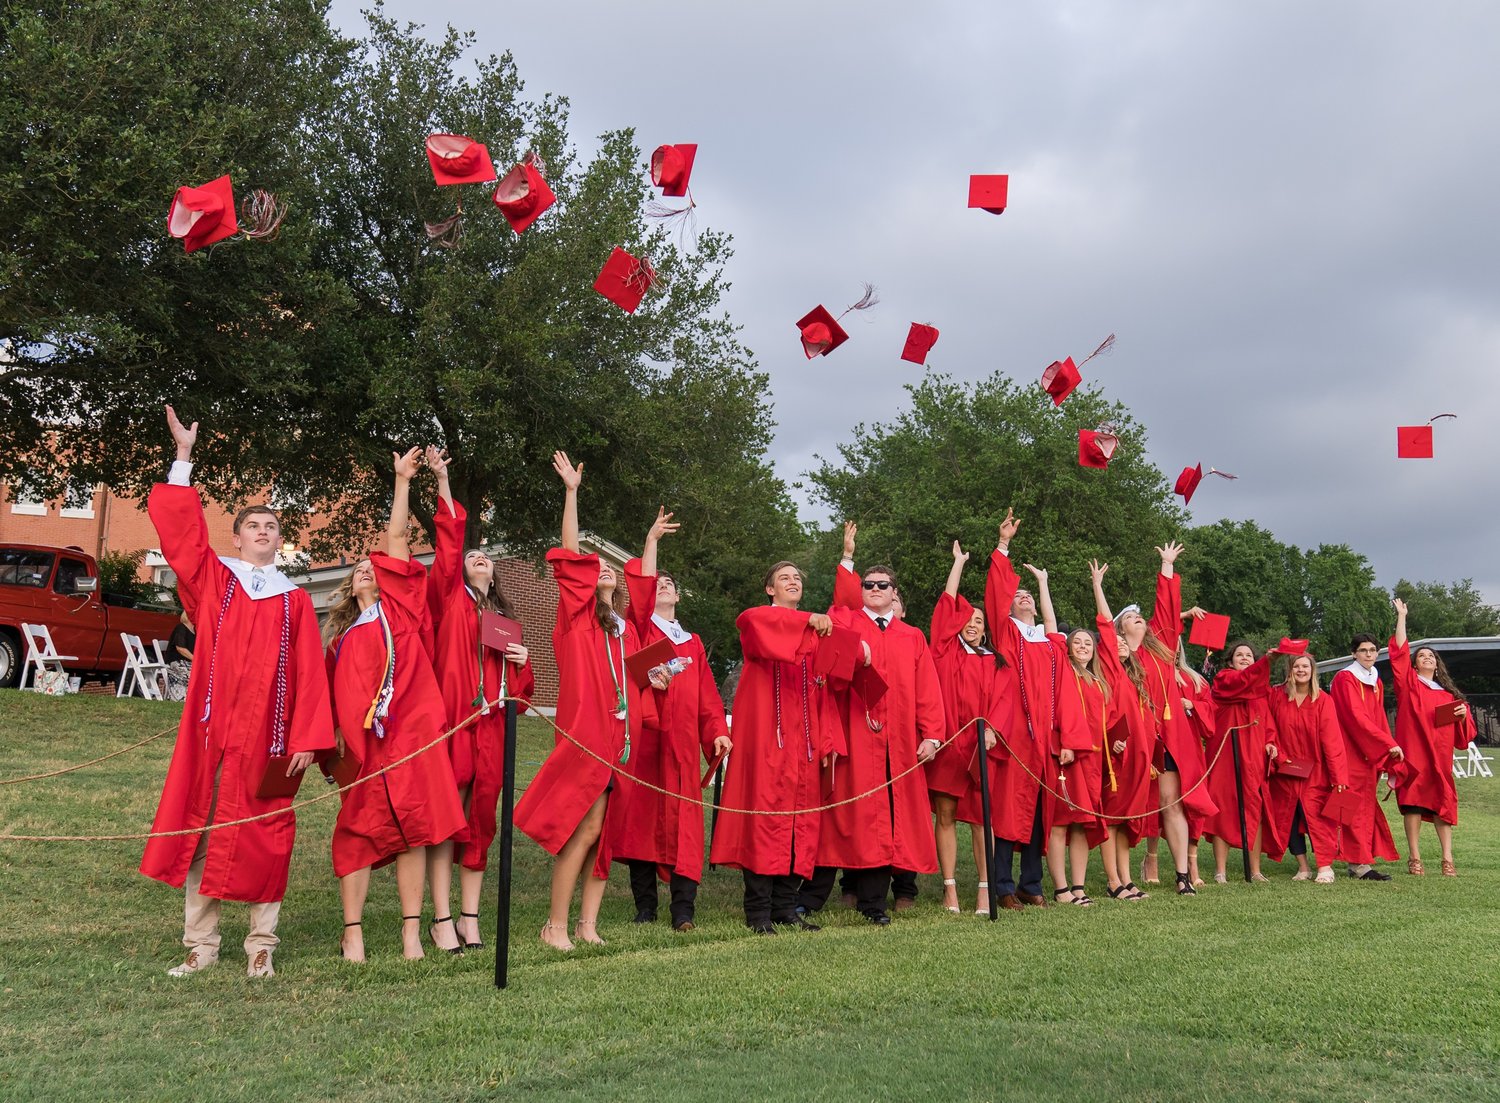 Eighteen seniors received their diplomas last Friday during Shiner St. Paul High School’s annual commencement exercise. The celebration included a dual ceremony, with the annual awards tied to graduation.